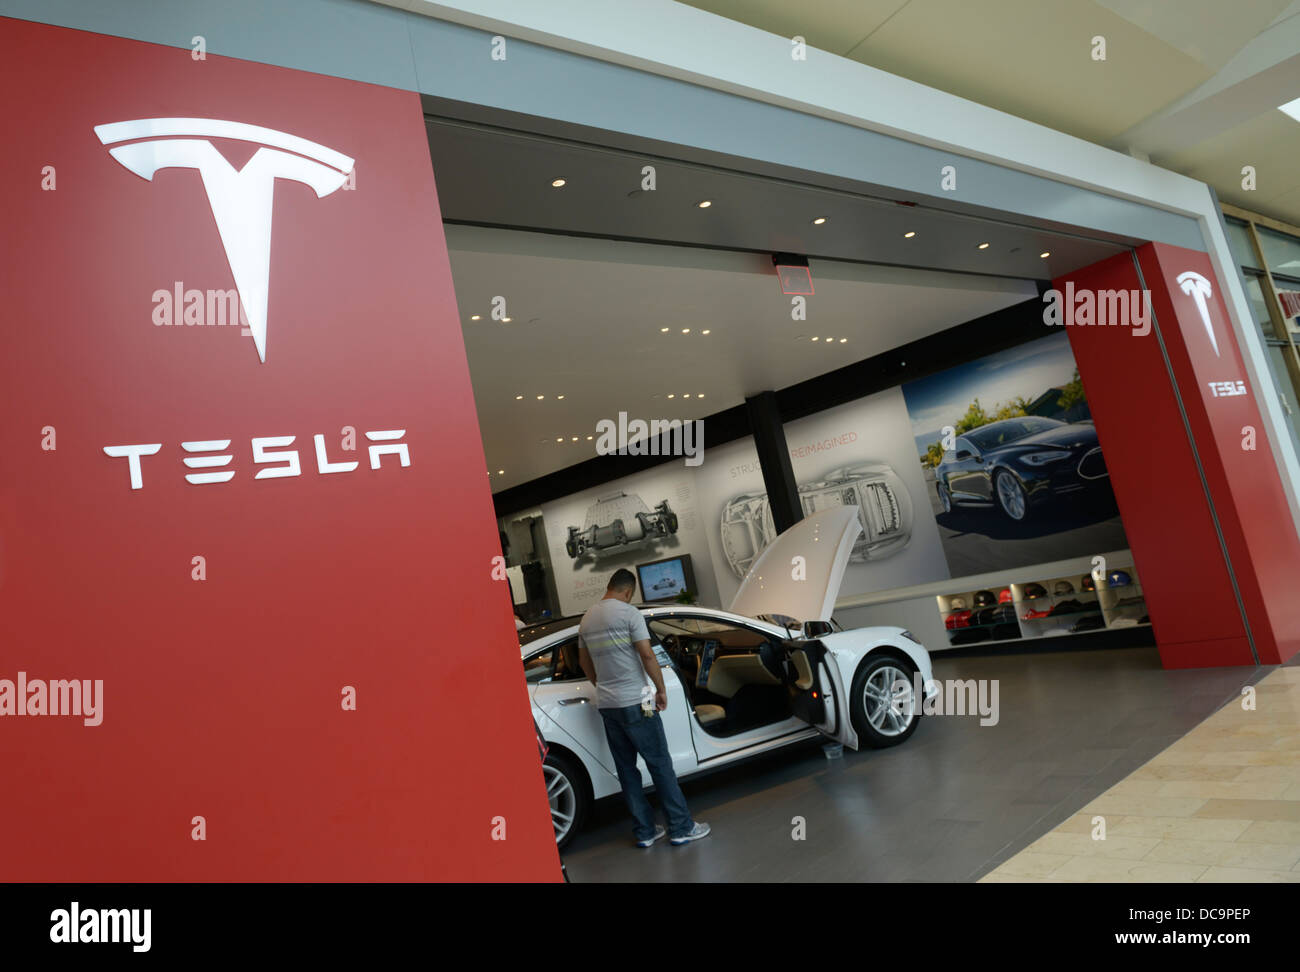 Tesla electric car dealer (retail store) in a shopping mall, NJ, USA Stock Photo